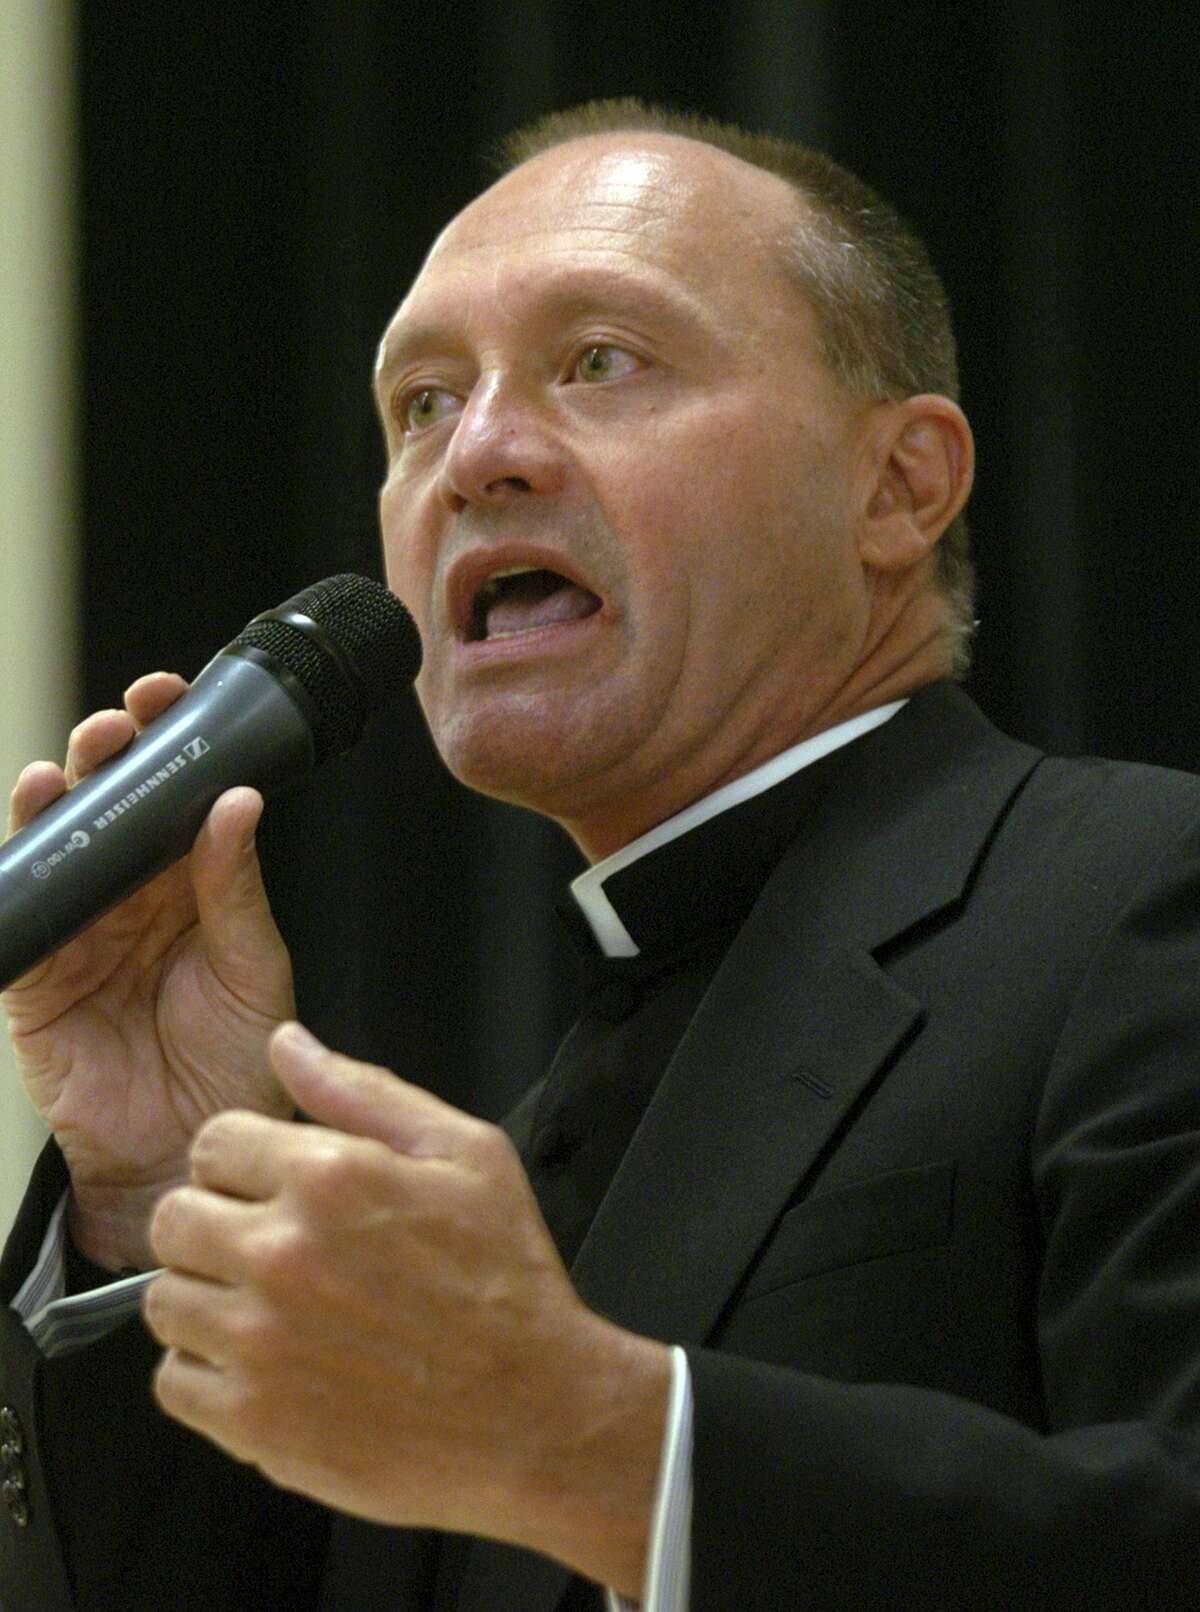 FILE - In this May 4, 2006, file photo, Monsignor Kevin Wallin speaks at the Catholic Center, headquarters of the Diocese of Bridgeport, in Bridgeport, Conn. Wallin, a suspended Roman Catholic priest who pleaded guilty to conspiracy to possess and distribute methamphetamine and bought a sex shop to possibly launder his drug money is asking a federal judge in Connecticut for leniency at his sentencing. Wallin is scheduled for sentencing Thursday, May 7, 2015, in U.S. District Court in Hartford, Conn.